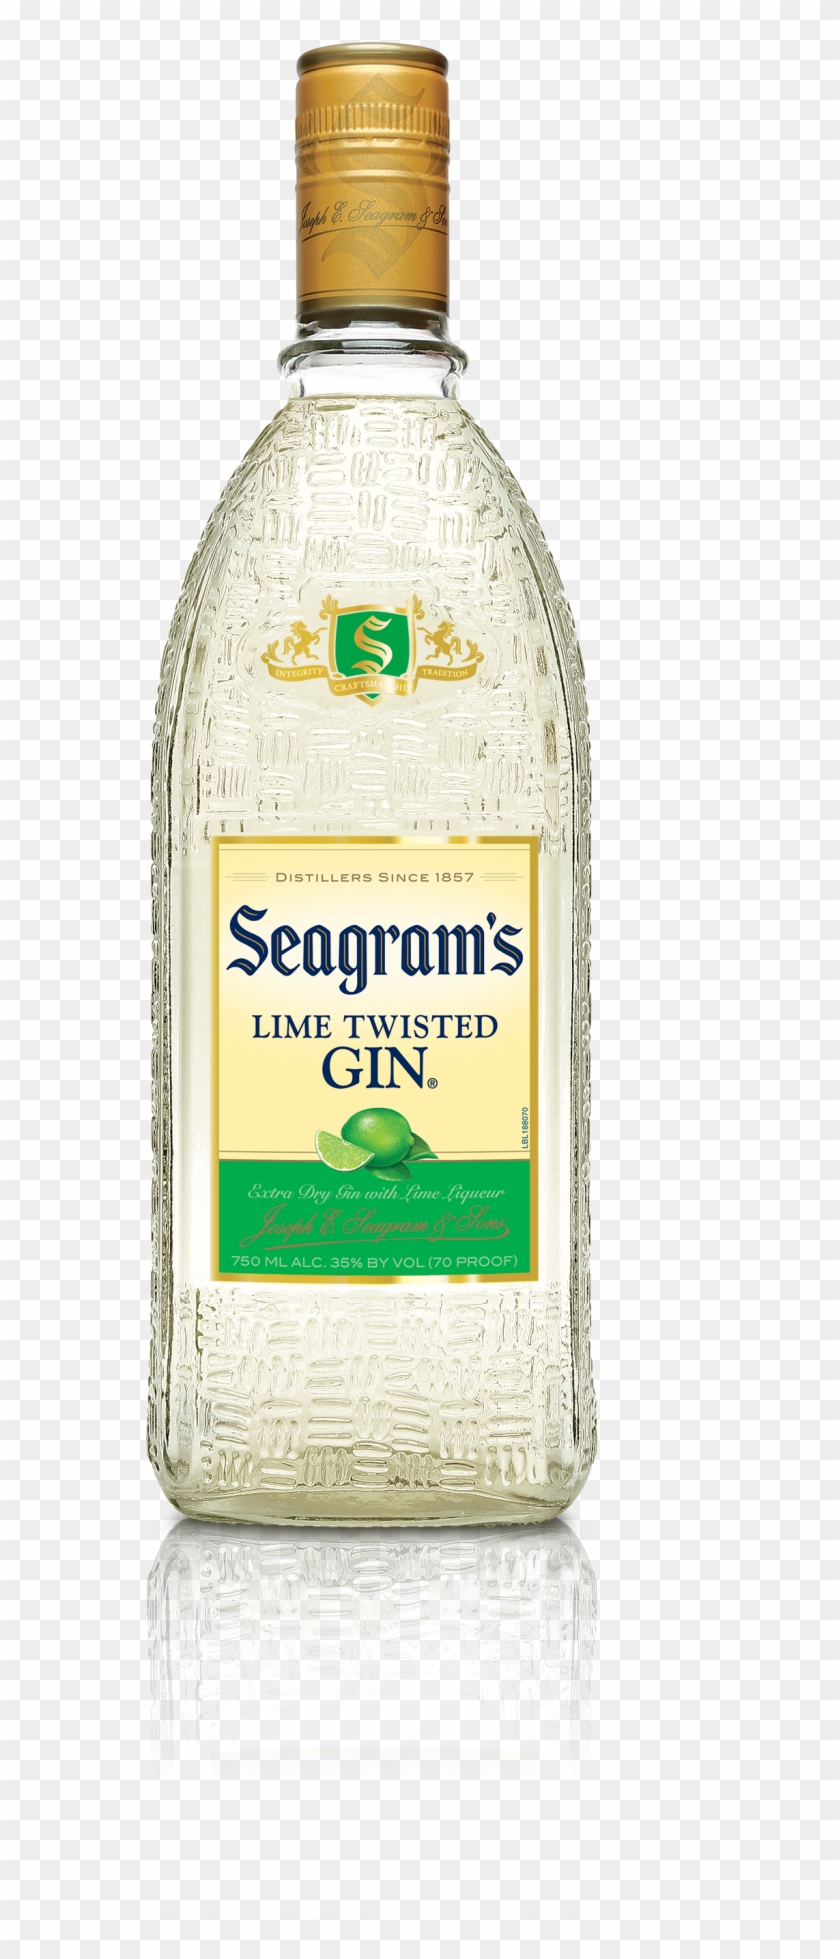 Seagram's Gin Usa Twisted Lime 750ml Bottle - Seagram's Lime Twisted Gin 375ml Clipart #3691890